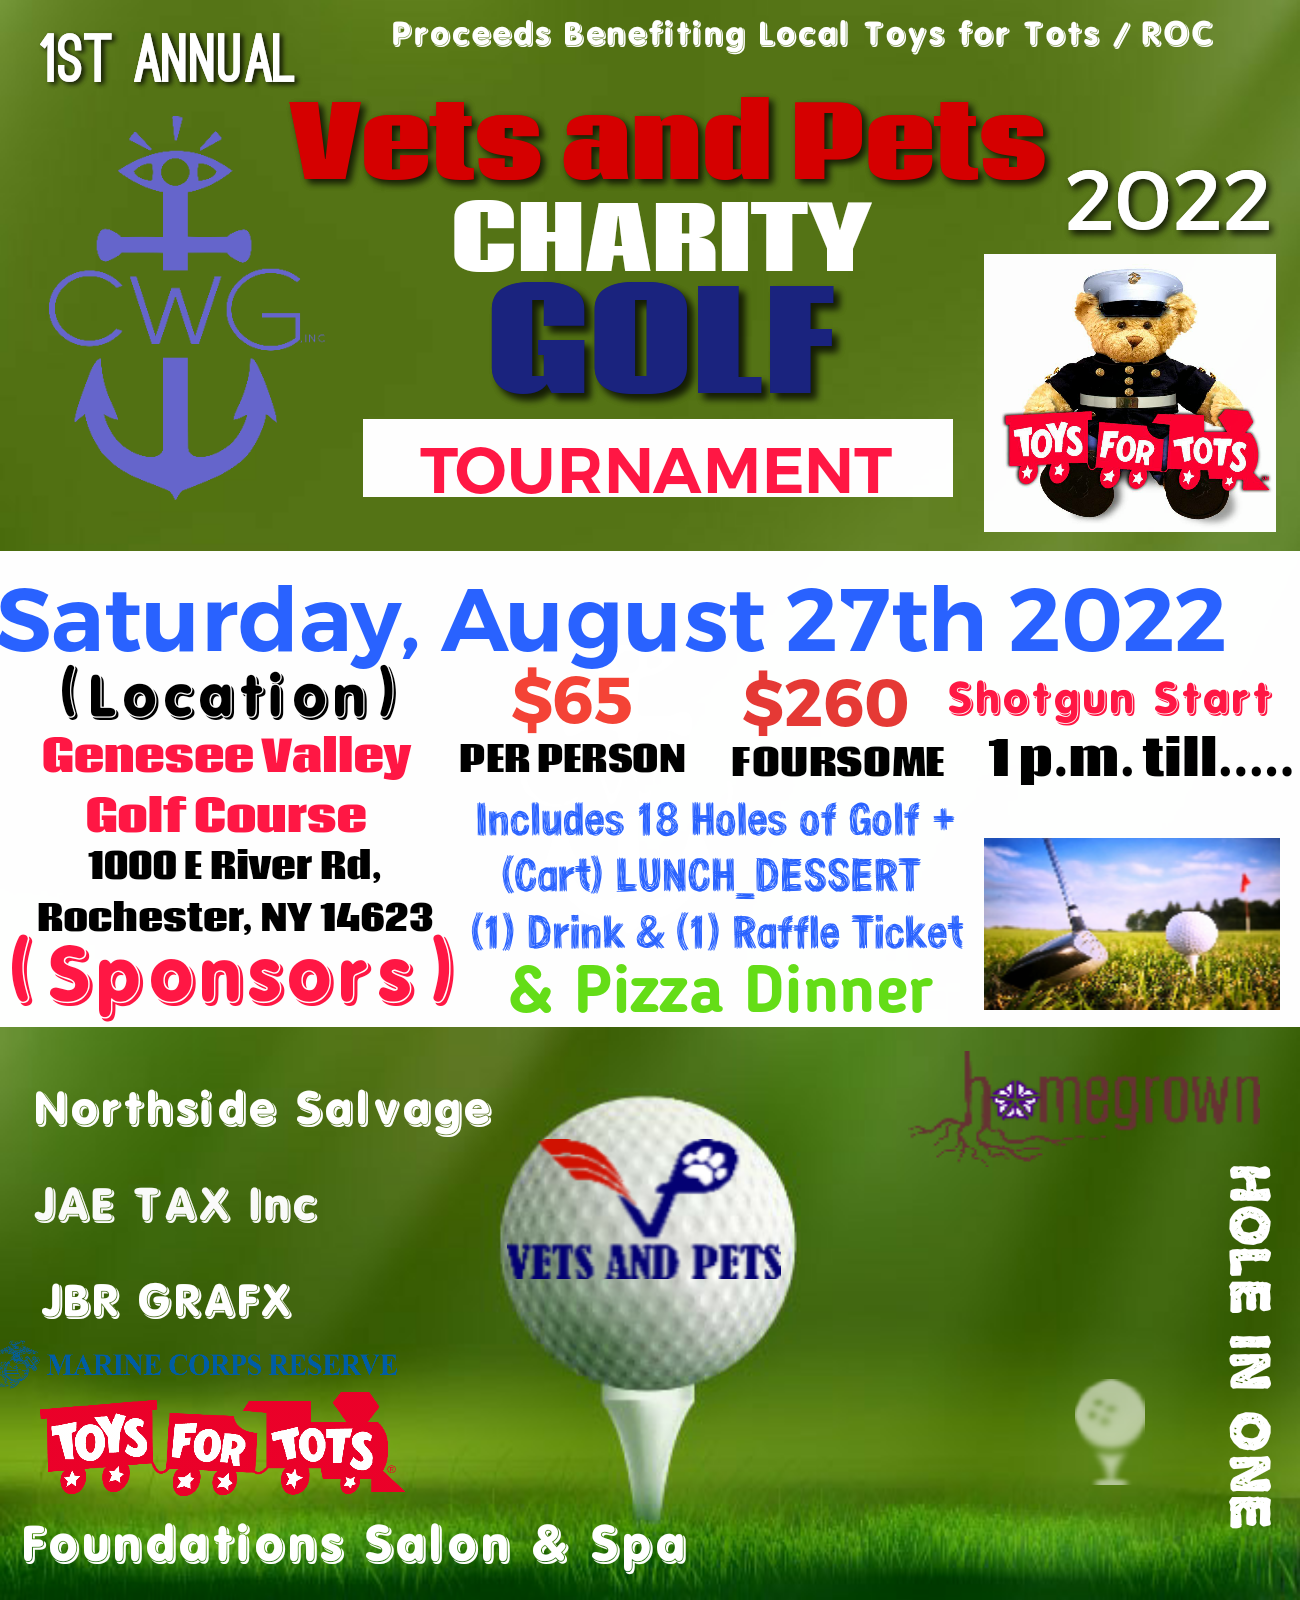 1st Annual Vets And Pets (Charity) Golf Tournament